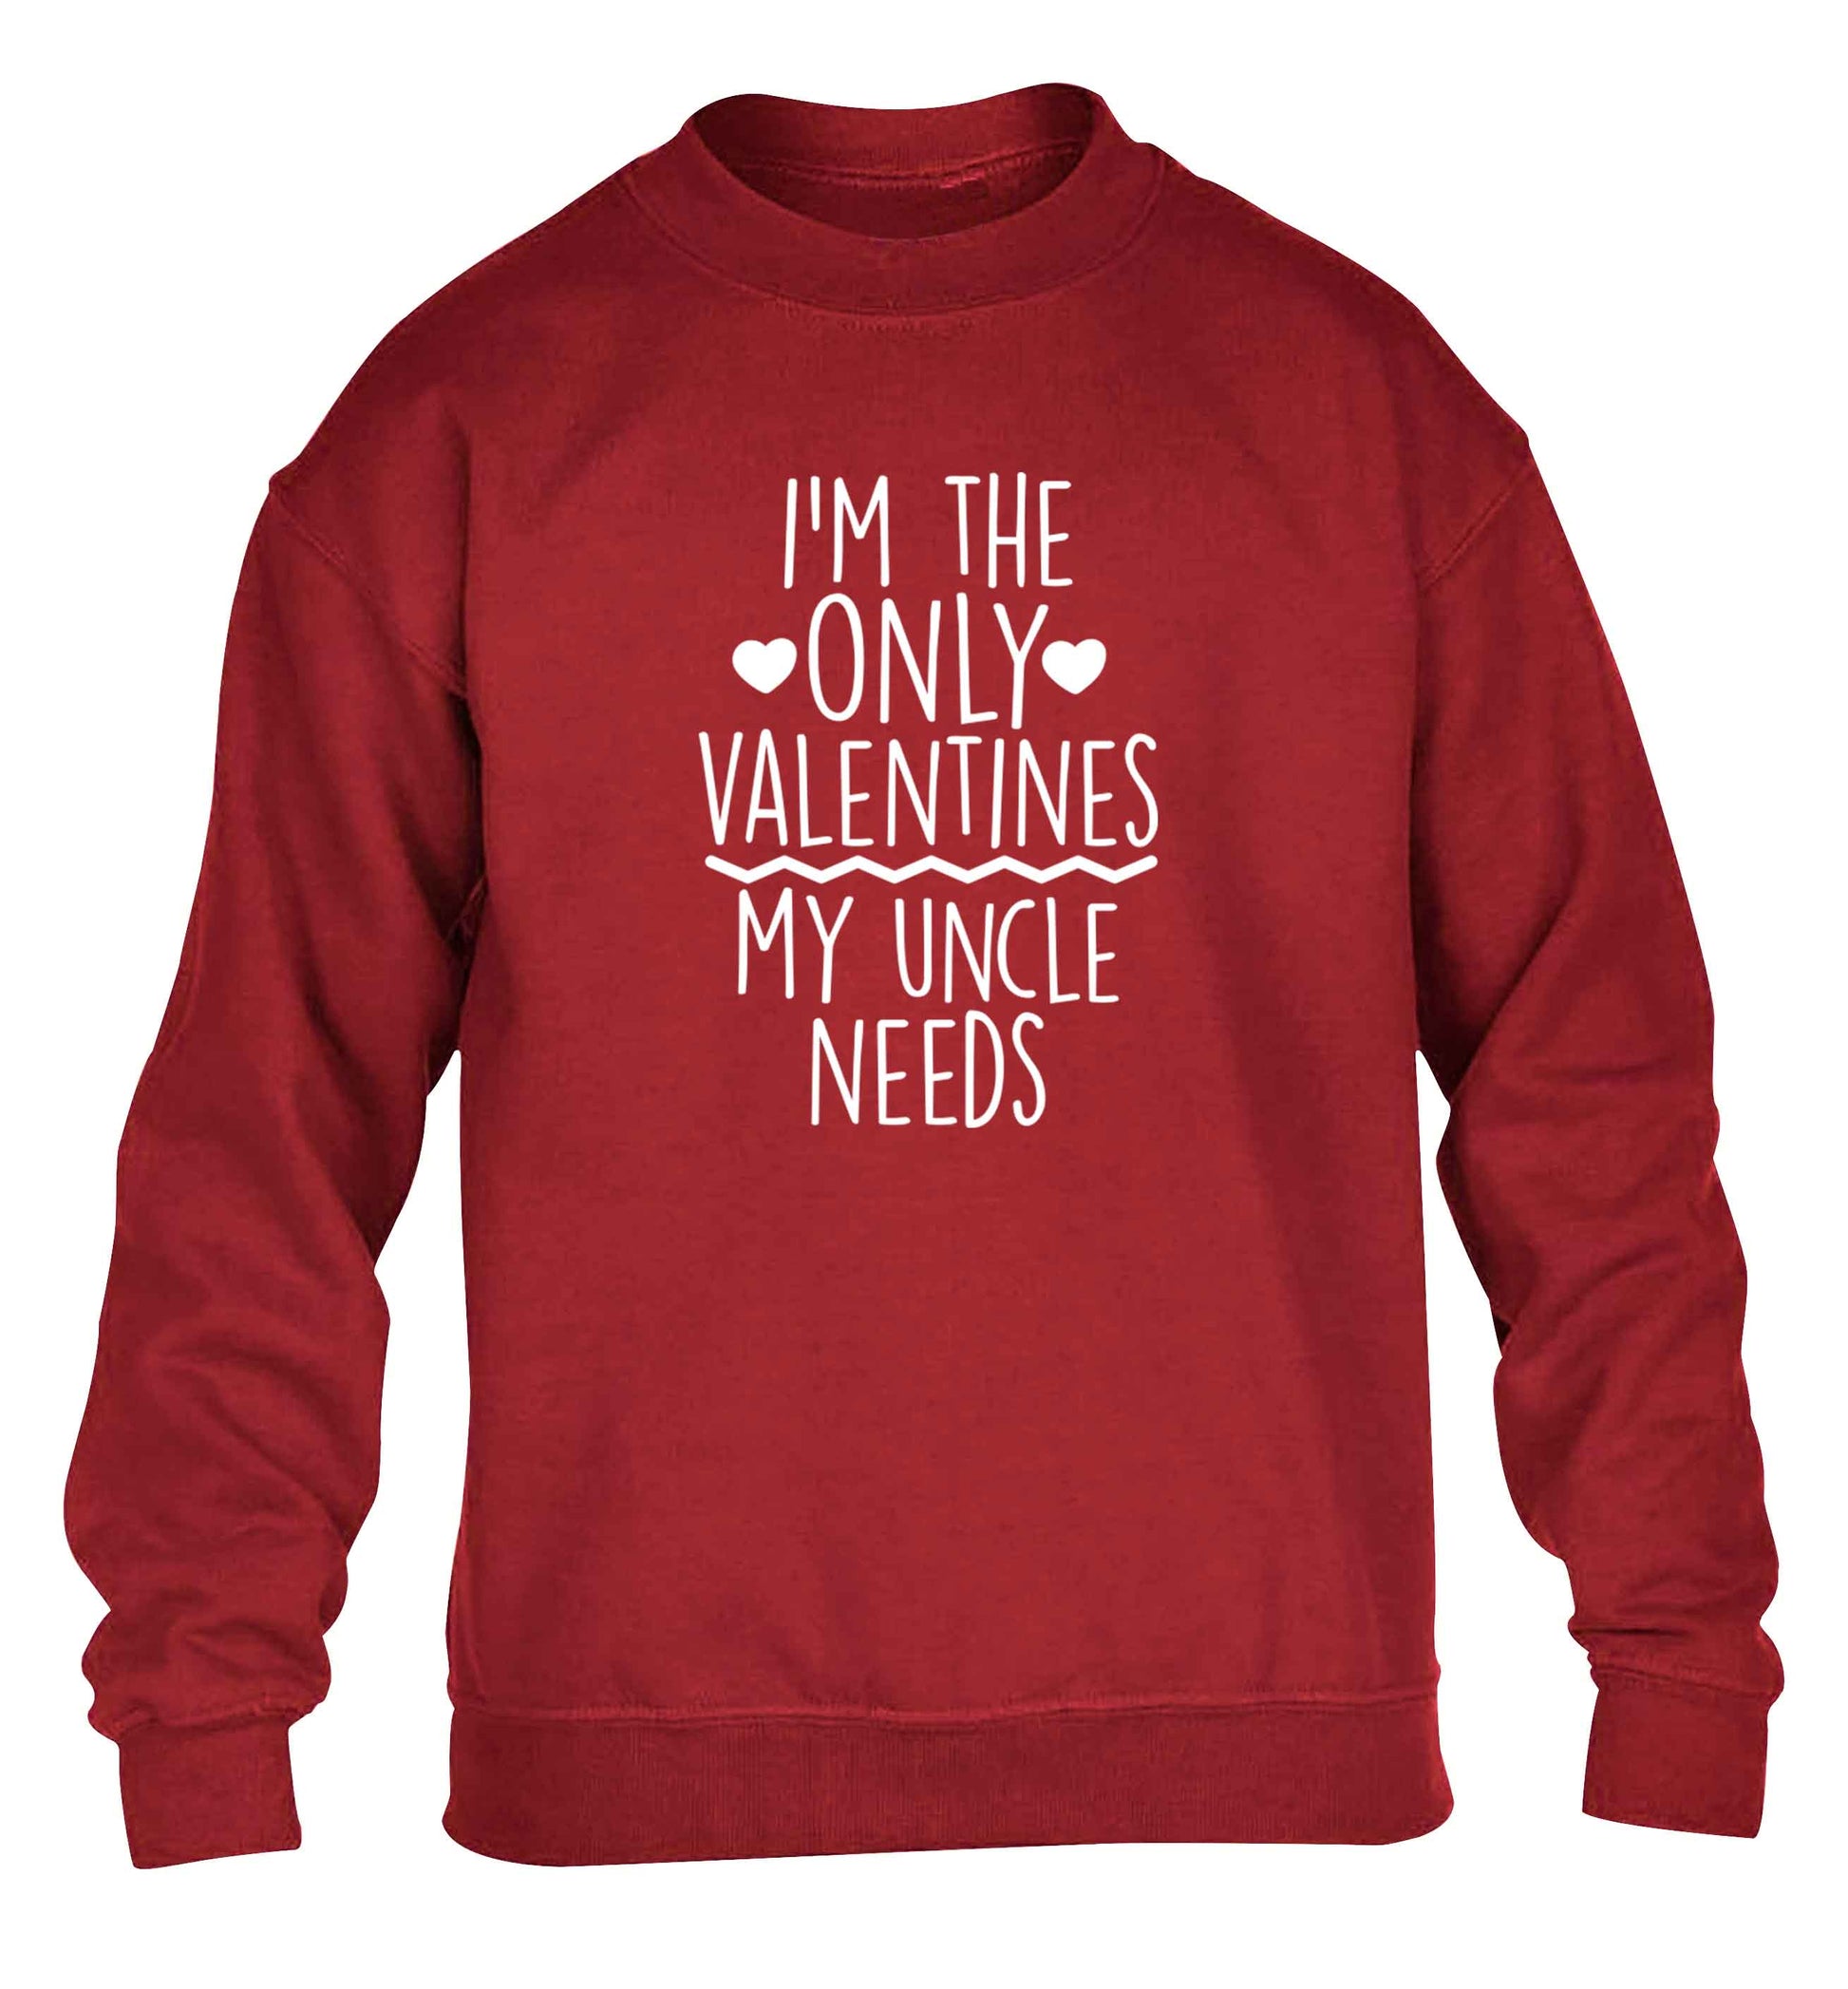 I'm the only valentines my uncle needs children's grey sweater 12-13 Years